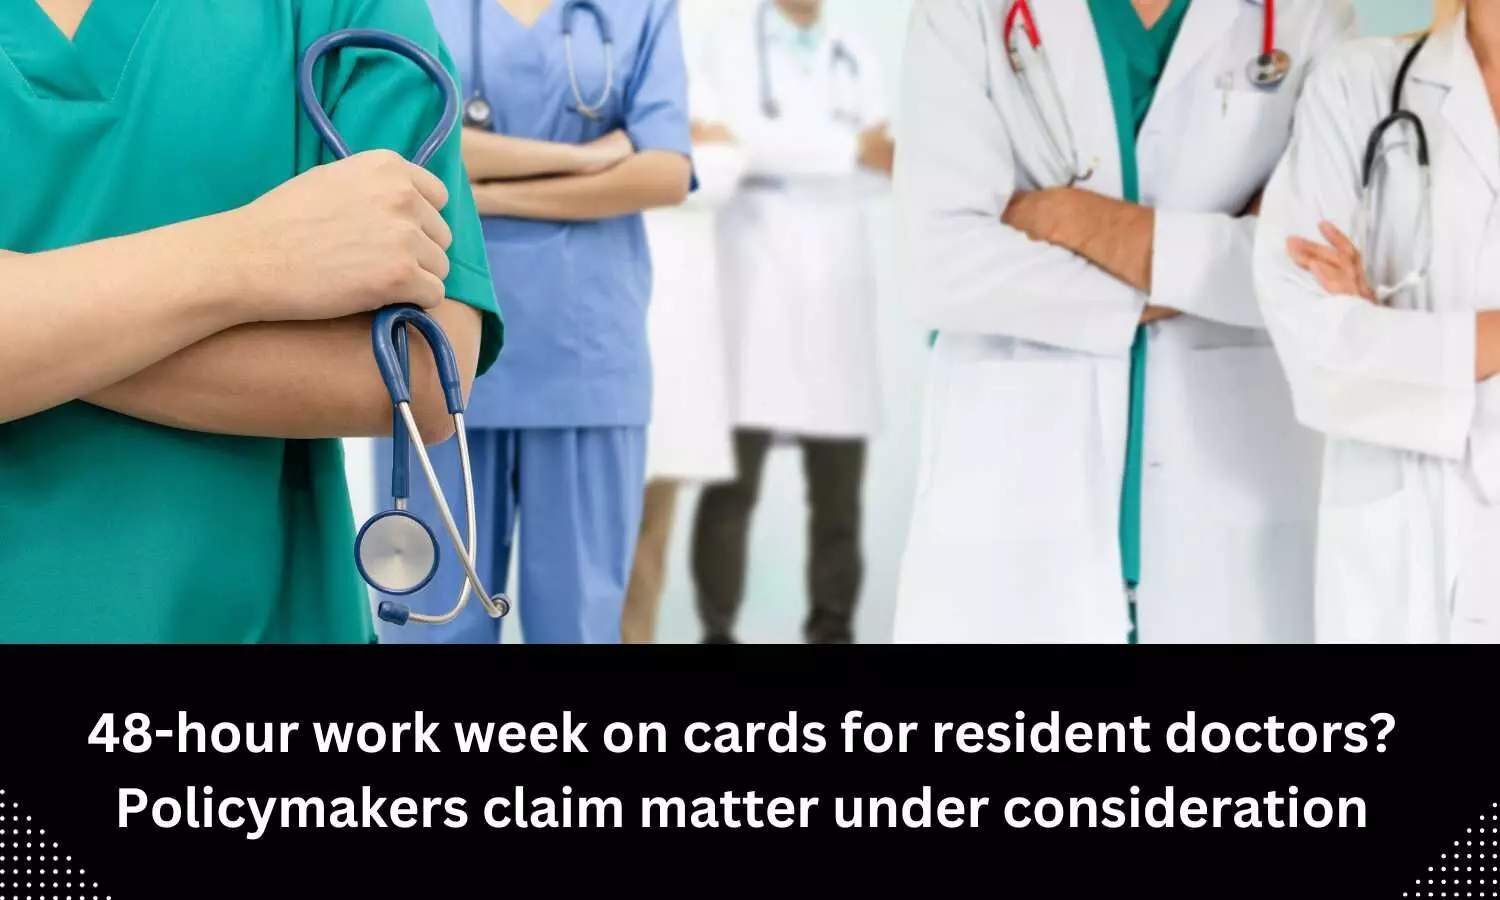 48-hour work week on cards for resident doctors? Policymakers claim matter under consideration